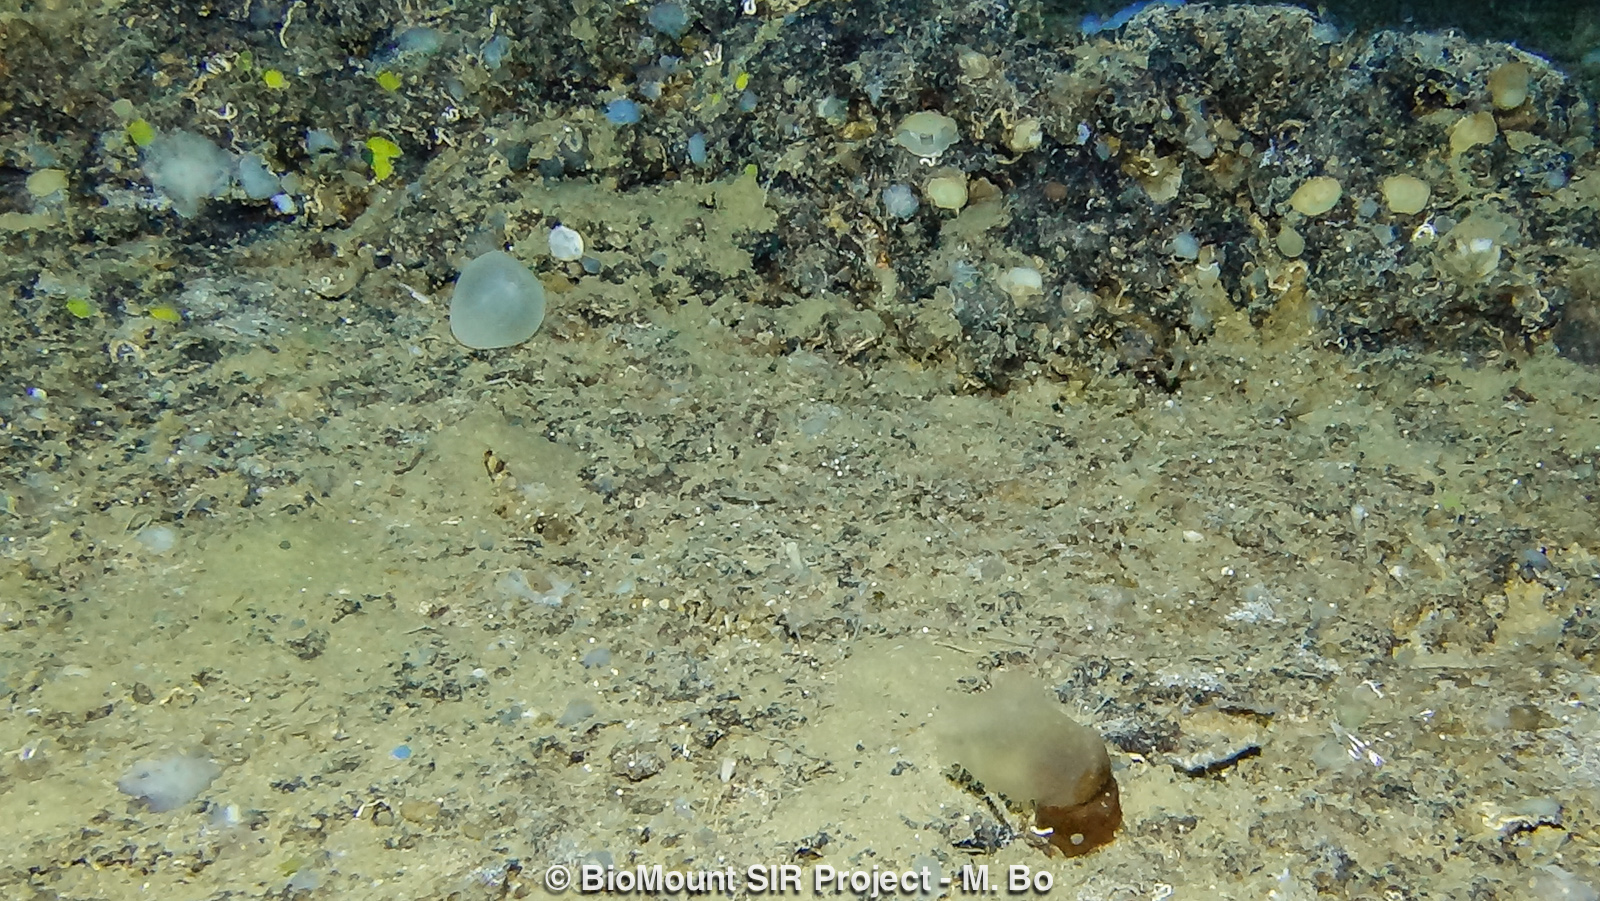 Brachiopods and ascidians on the seafloor.